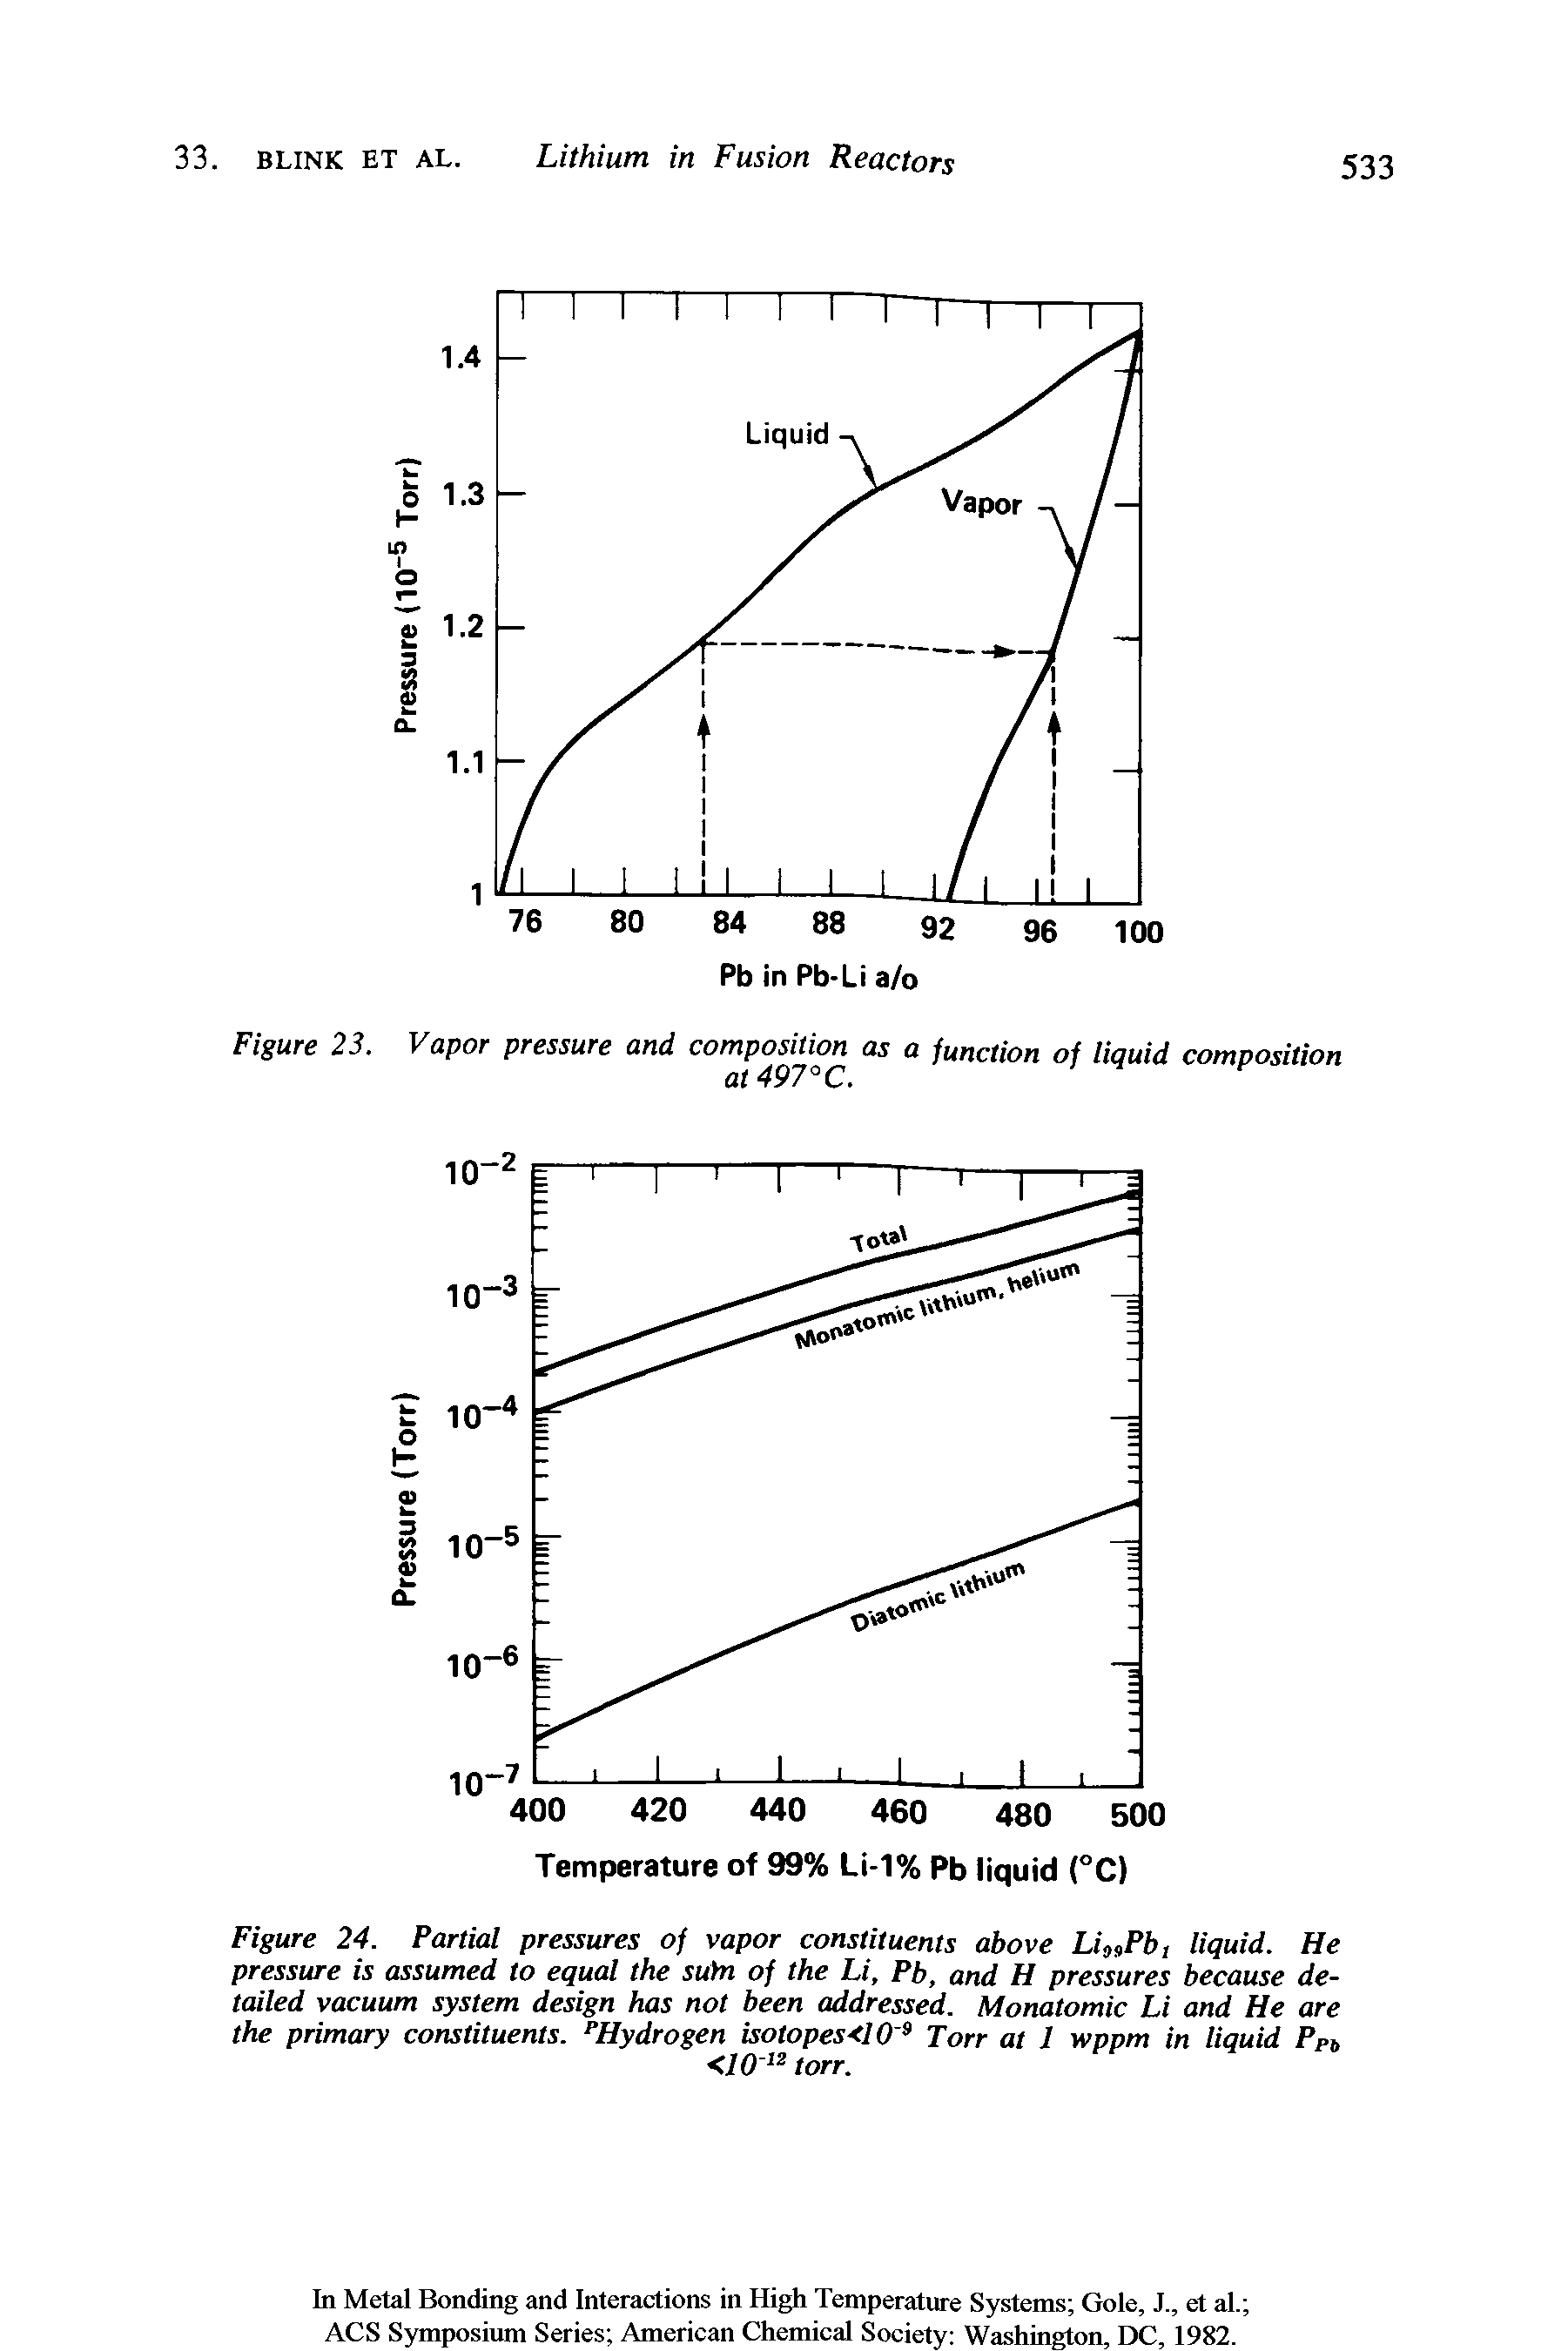 Figure 24. Partial pressures of vapor constituents above LhsPb, liquid. He pressure is assumed to equal the sutn of the Li, Pb, and H pressures because detailed vacuum system design has not been addressed. Monatomic Li and He are the primary constituents. Hydrogen isotopes<10 Torr at 1 wppm in liquid Ppj,...